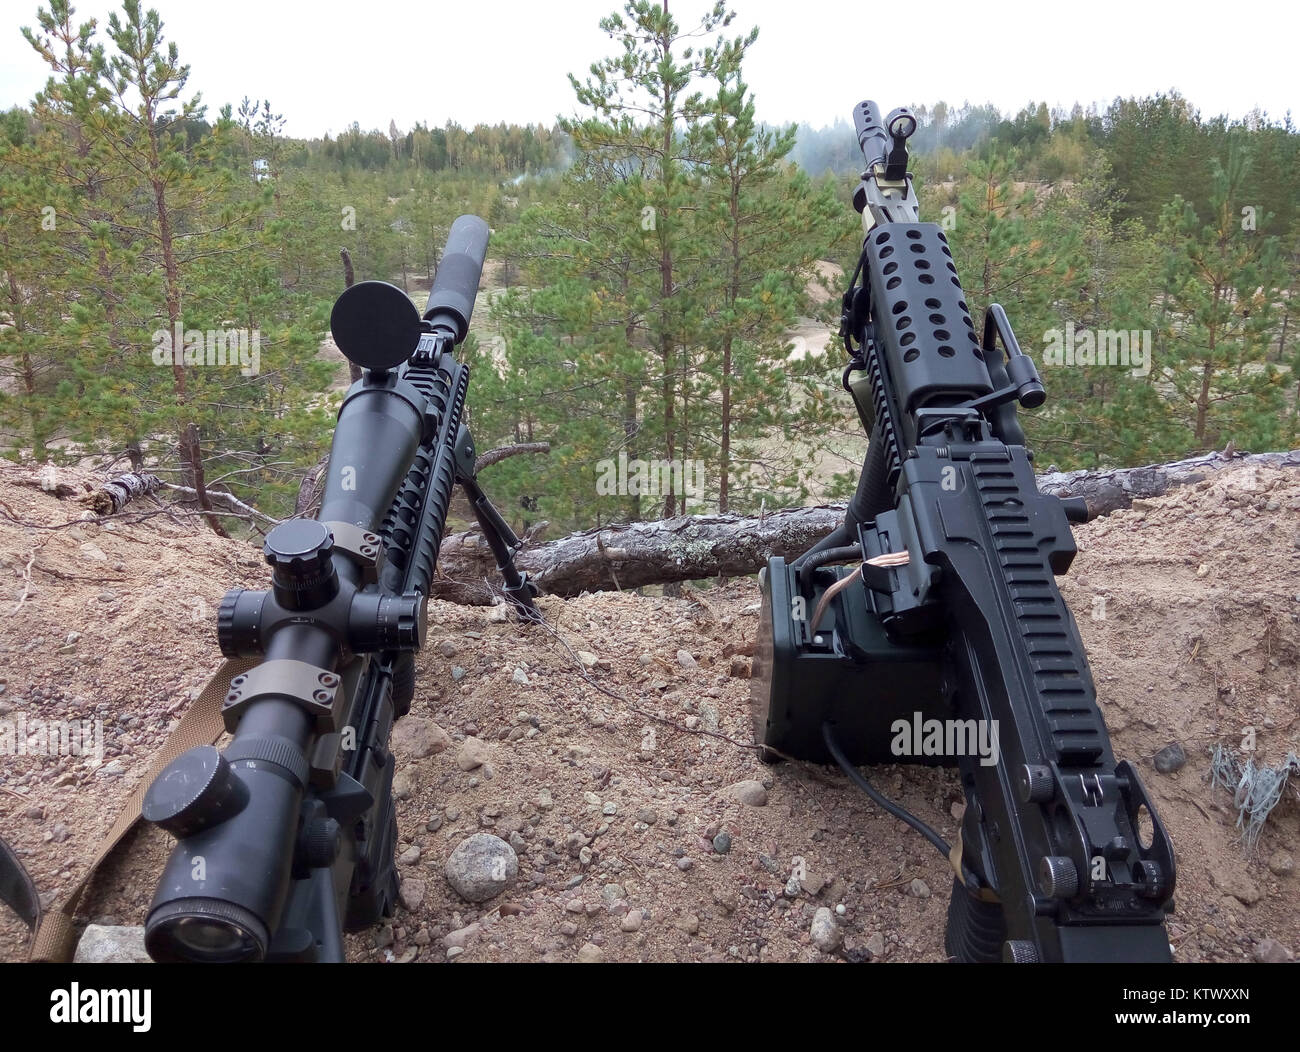 Assault rifle and machine gun on the background of pine forests and sand. Stock Photo